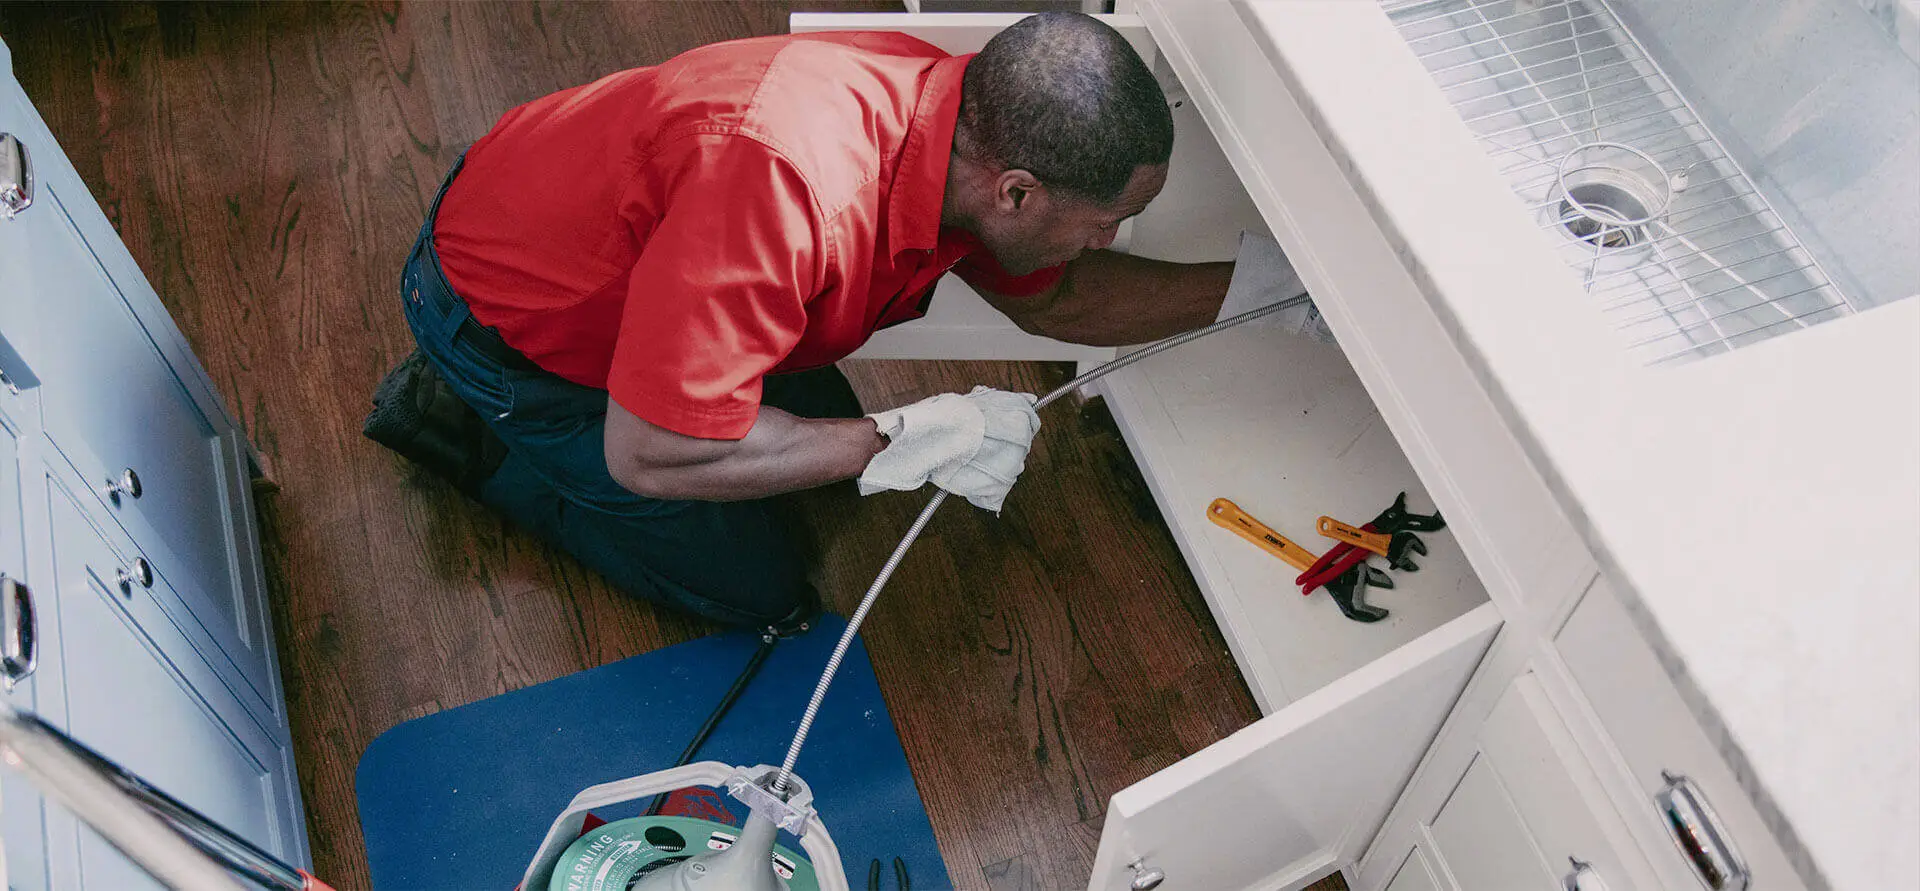 Mr. Rooter service professional unclogging a kitchen sink drain.